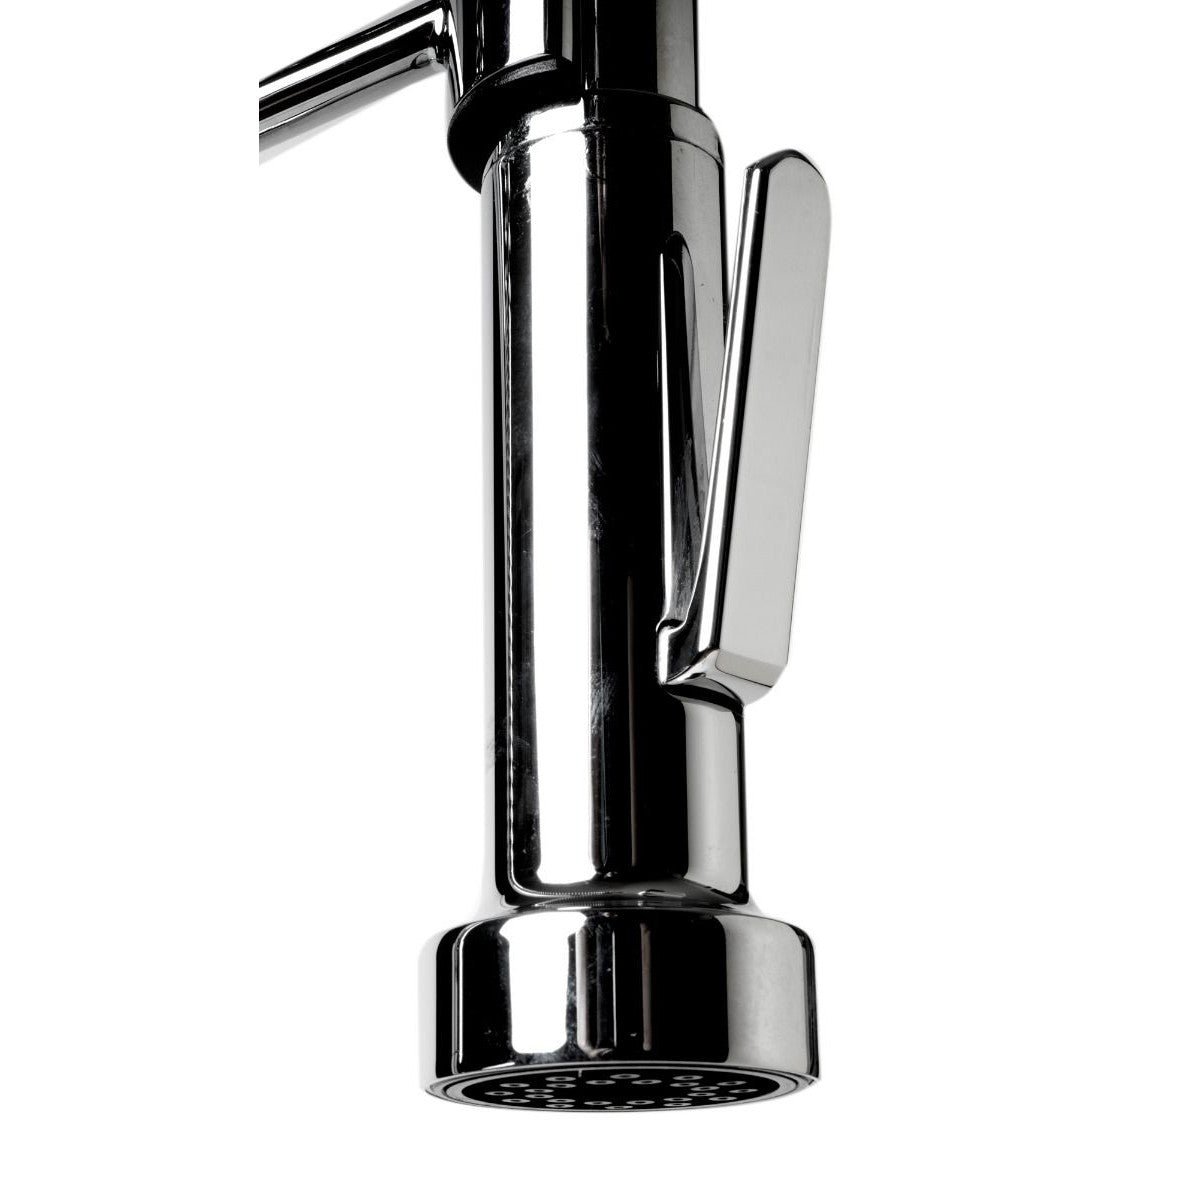 ALFI Brand ABKF3787-PC Polished Chrome Double Spout Commercial Spring Kitchen Faucet